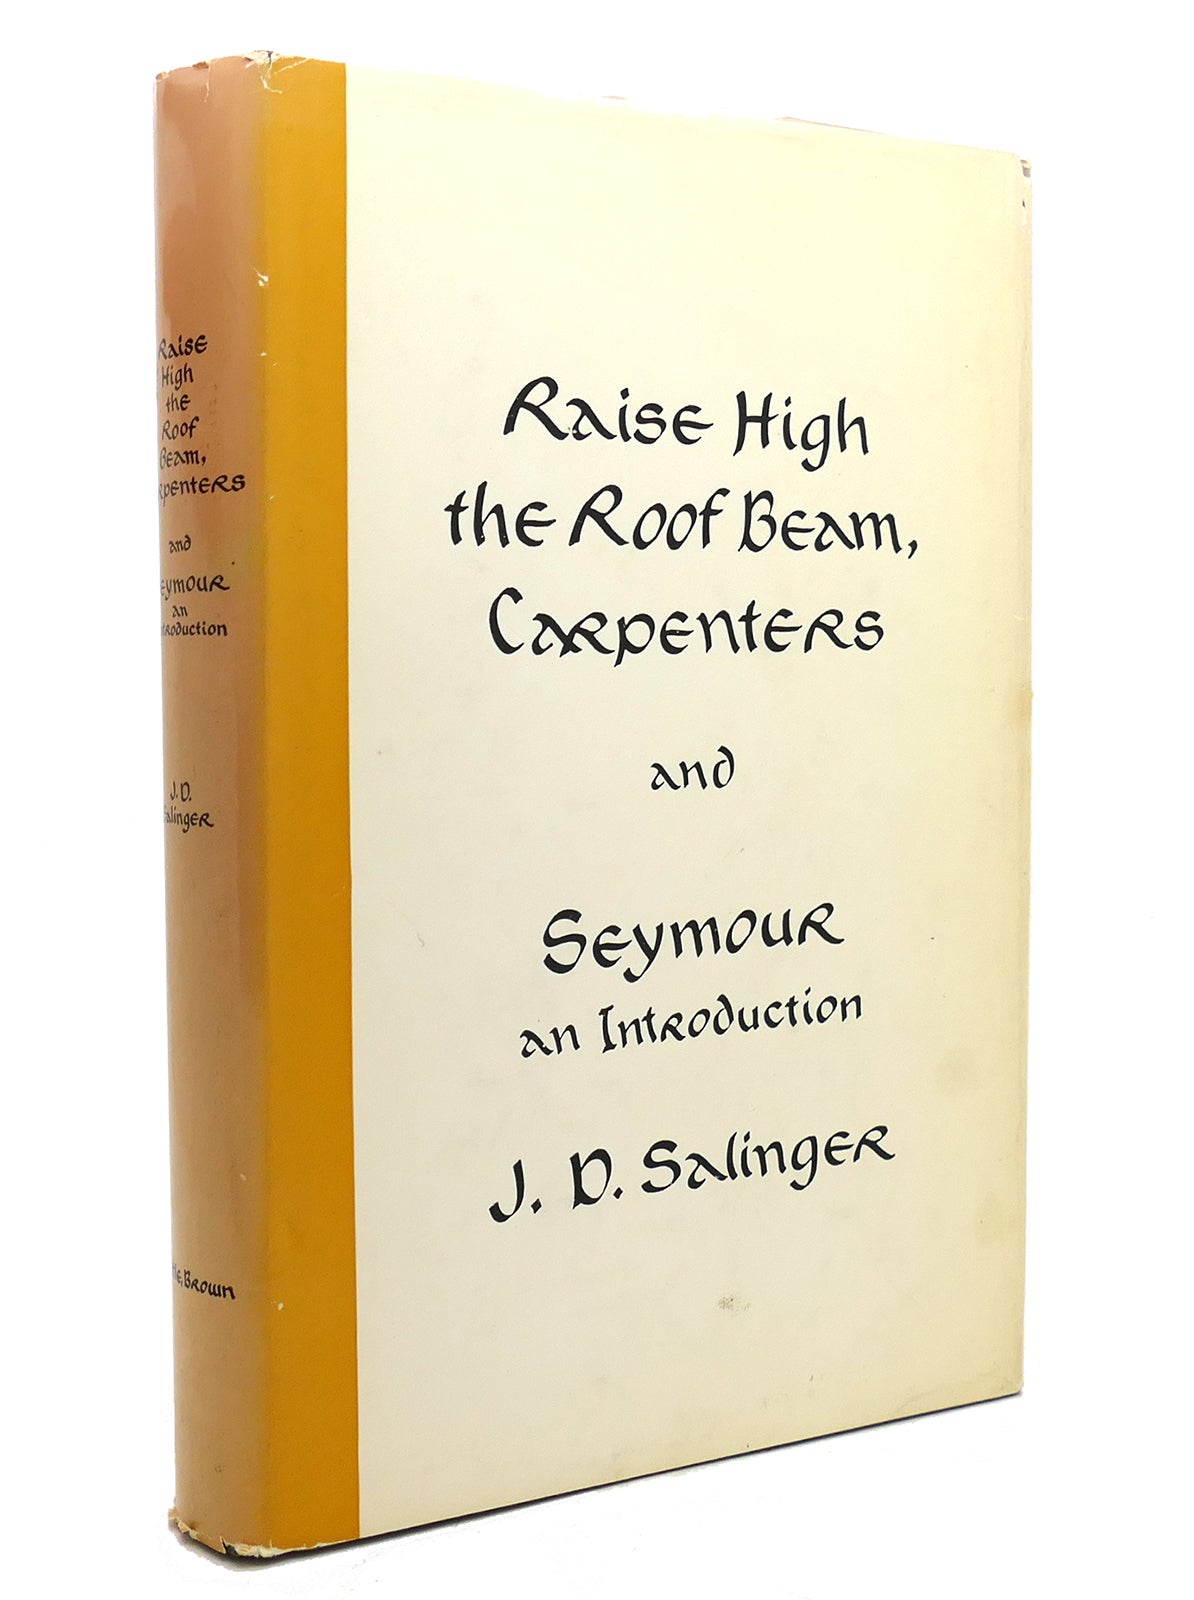 RAISE HIGH THE ROOF BEAM, CARPENTERS AND SEYMOUR AN INTRODUCTION. J. D. Salinger.